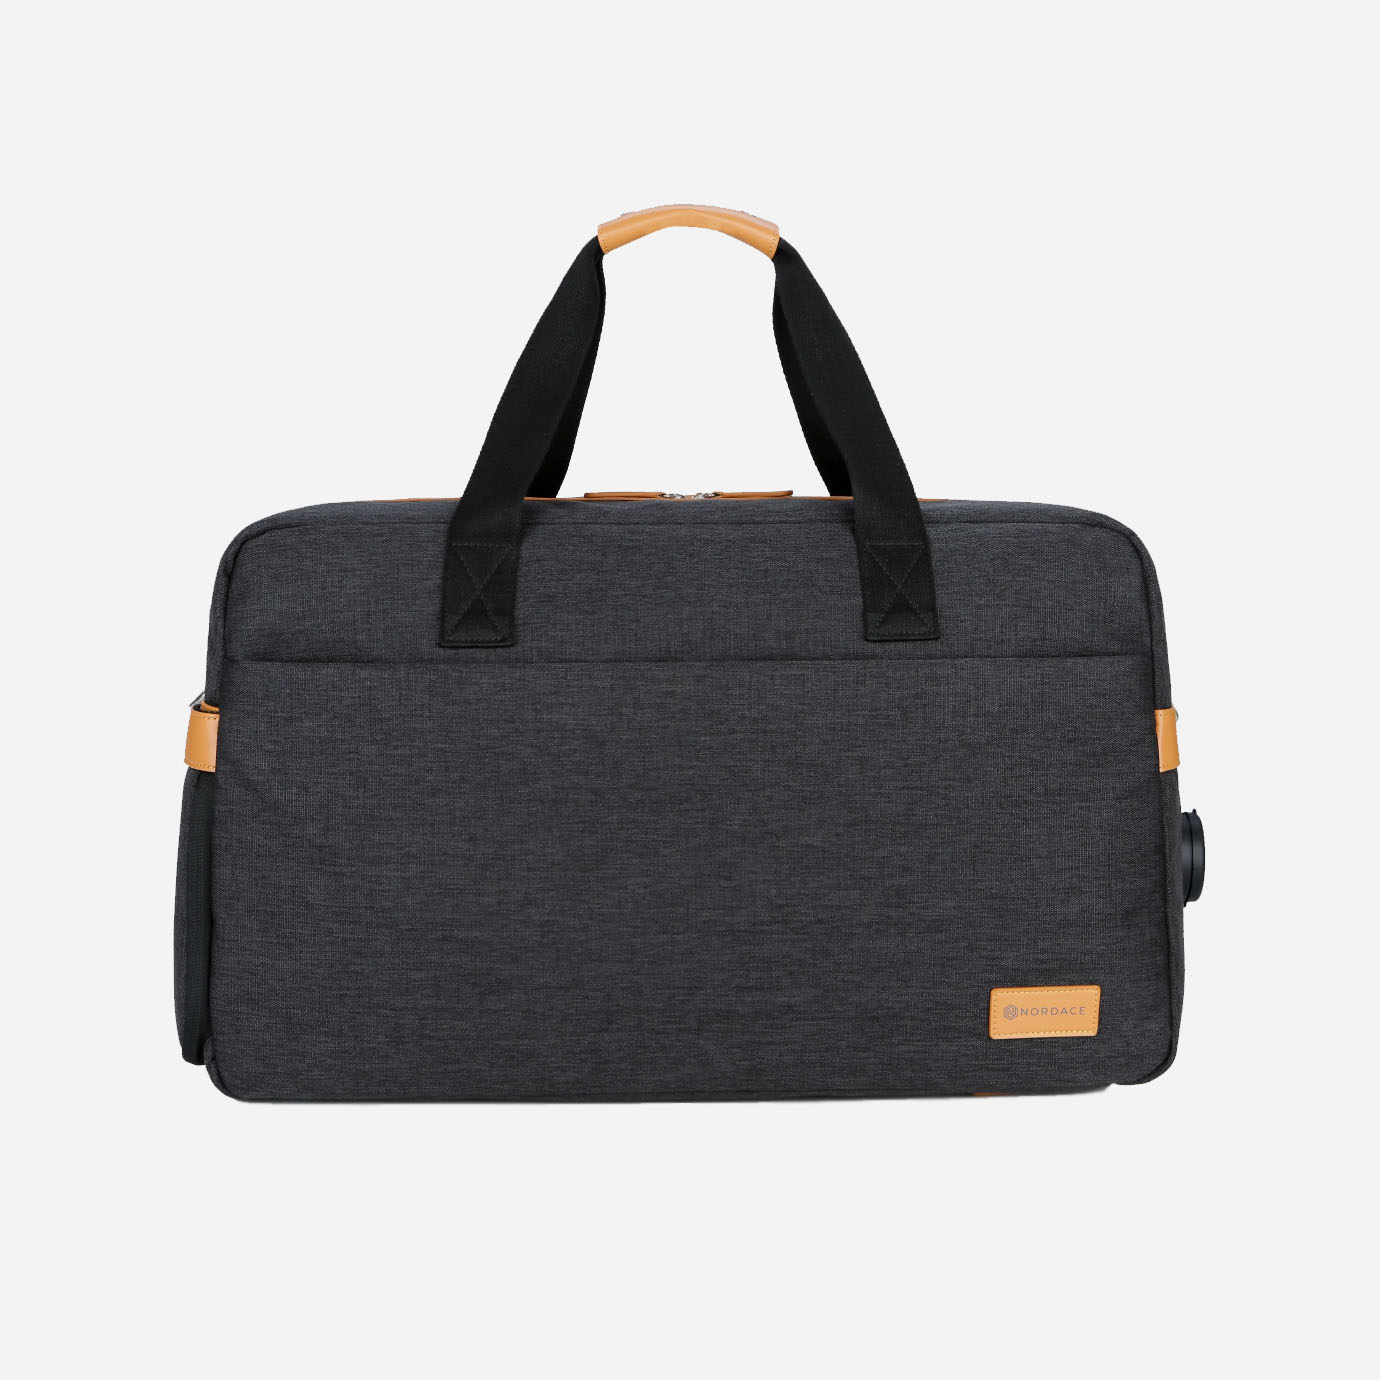 Nordace Sienna Duffel: Cheaper and even more cheerful weekender that holds all our technology gadgets. It is super light but tough